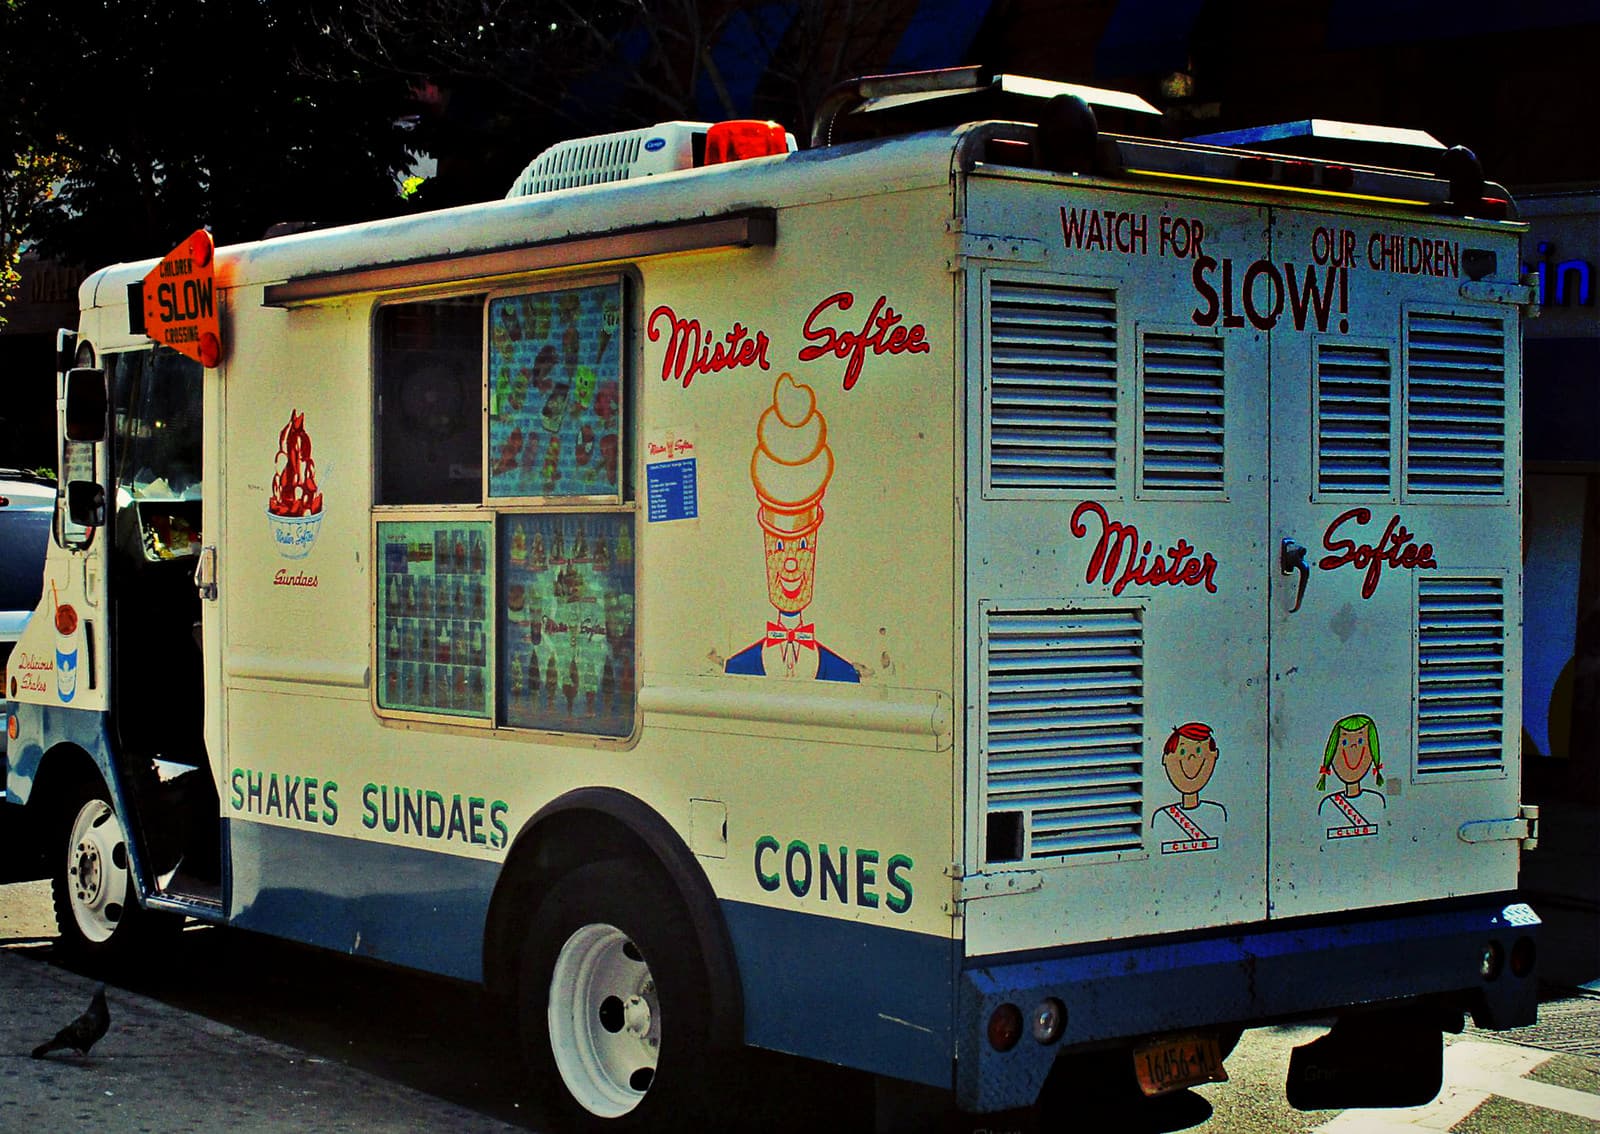 The ice cream truck scares the people of new York with its sinister melody